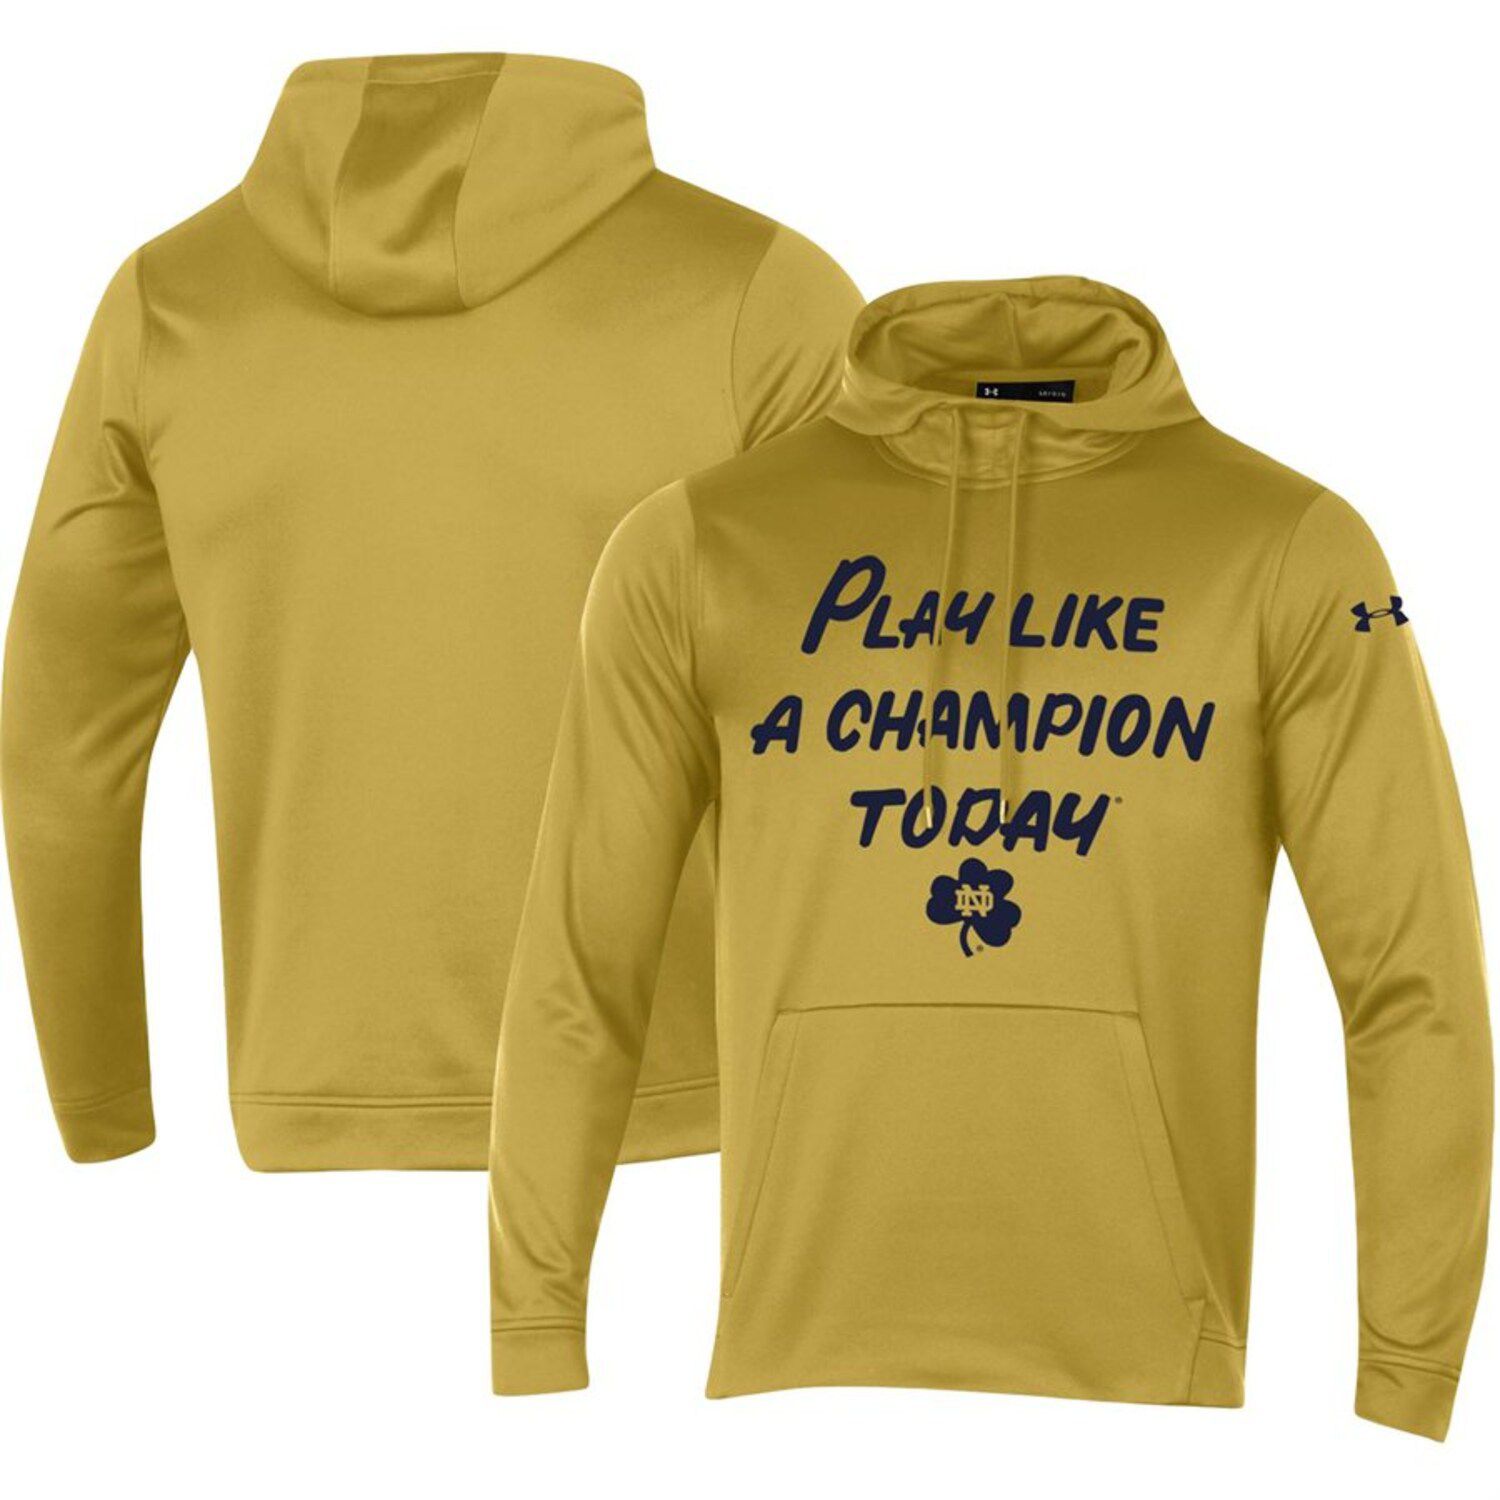 notre dame under armour pullover